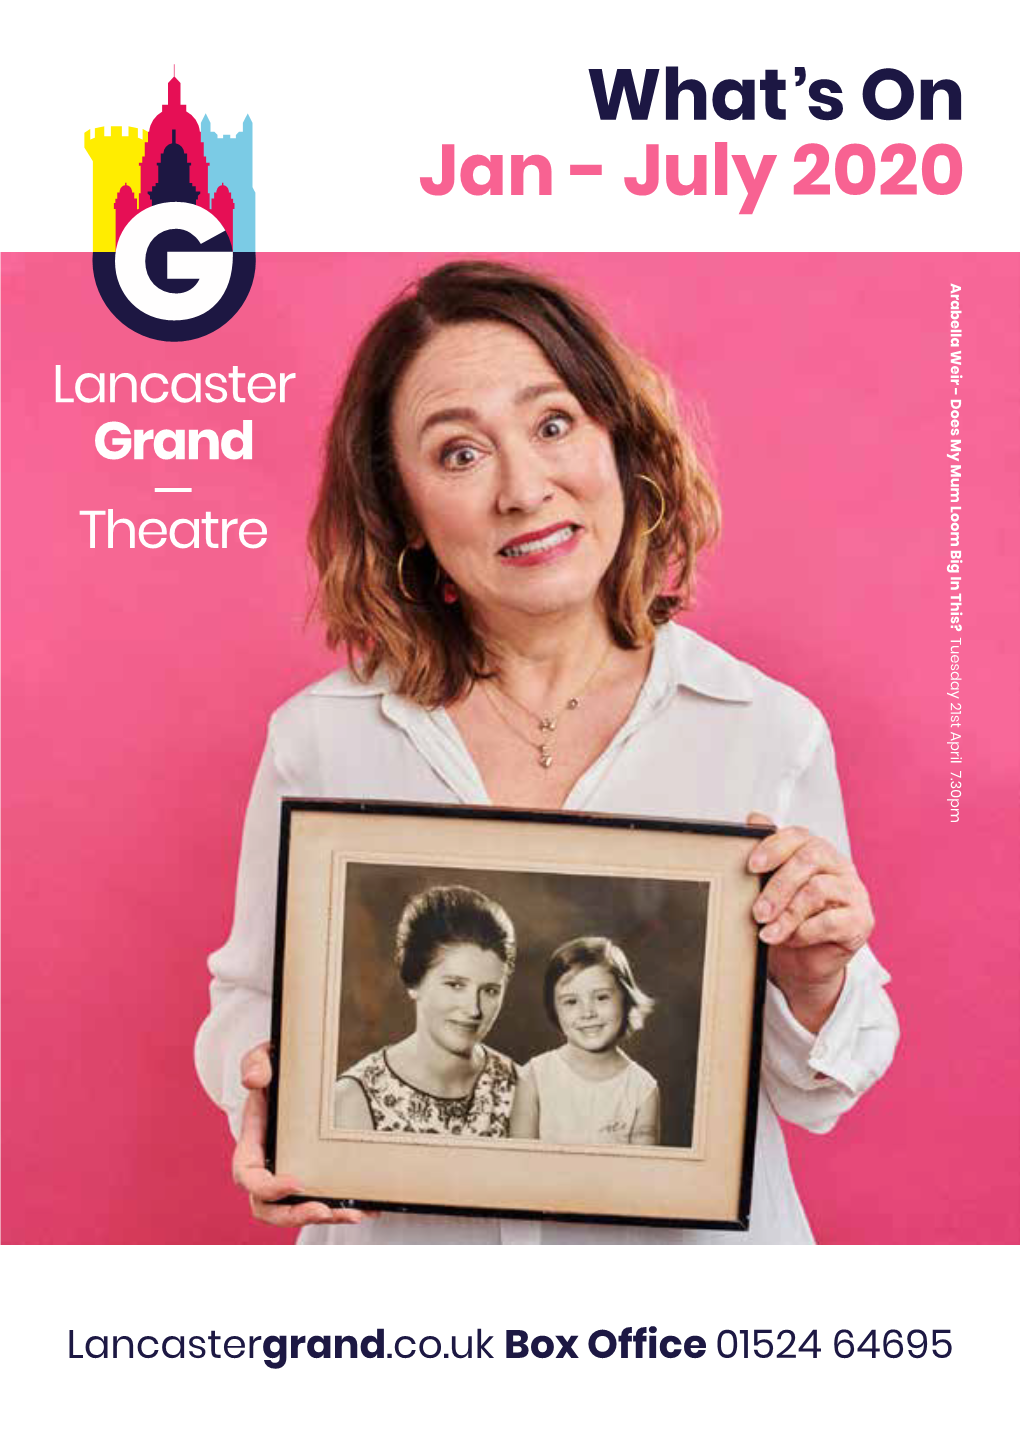 Lancastergrand.Co.Uk Box Office 01524 64695 Hello and a Very Warm Welcome to the Lancaster Grand Theatre